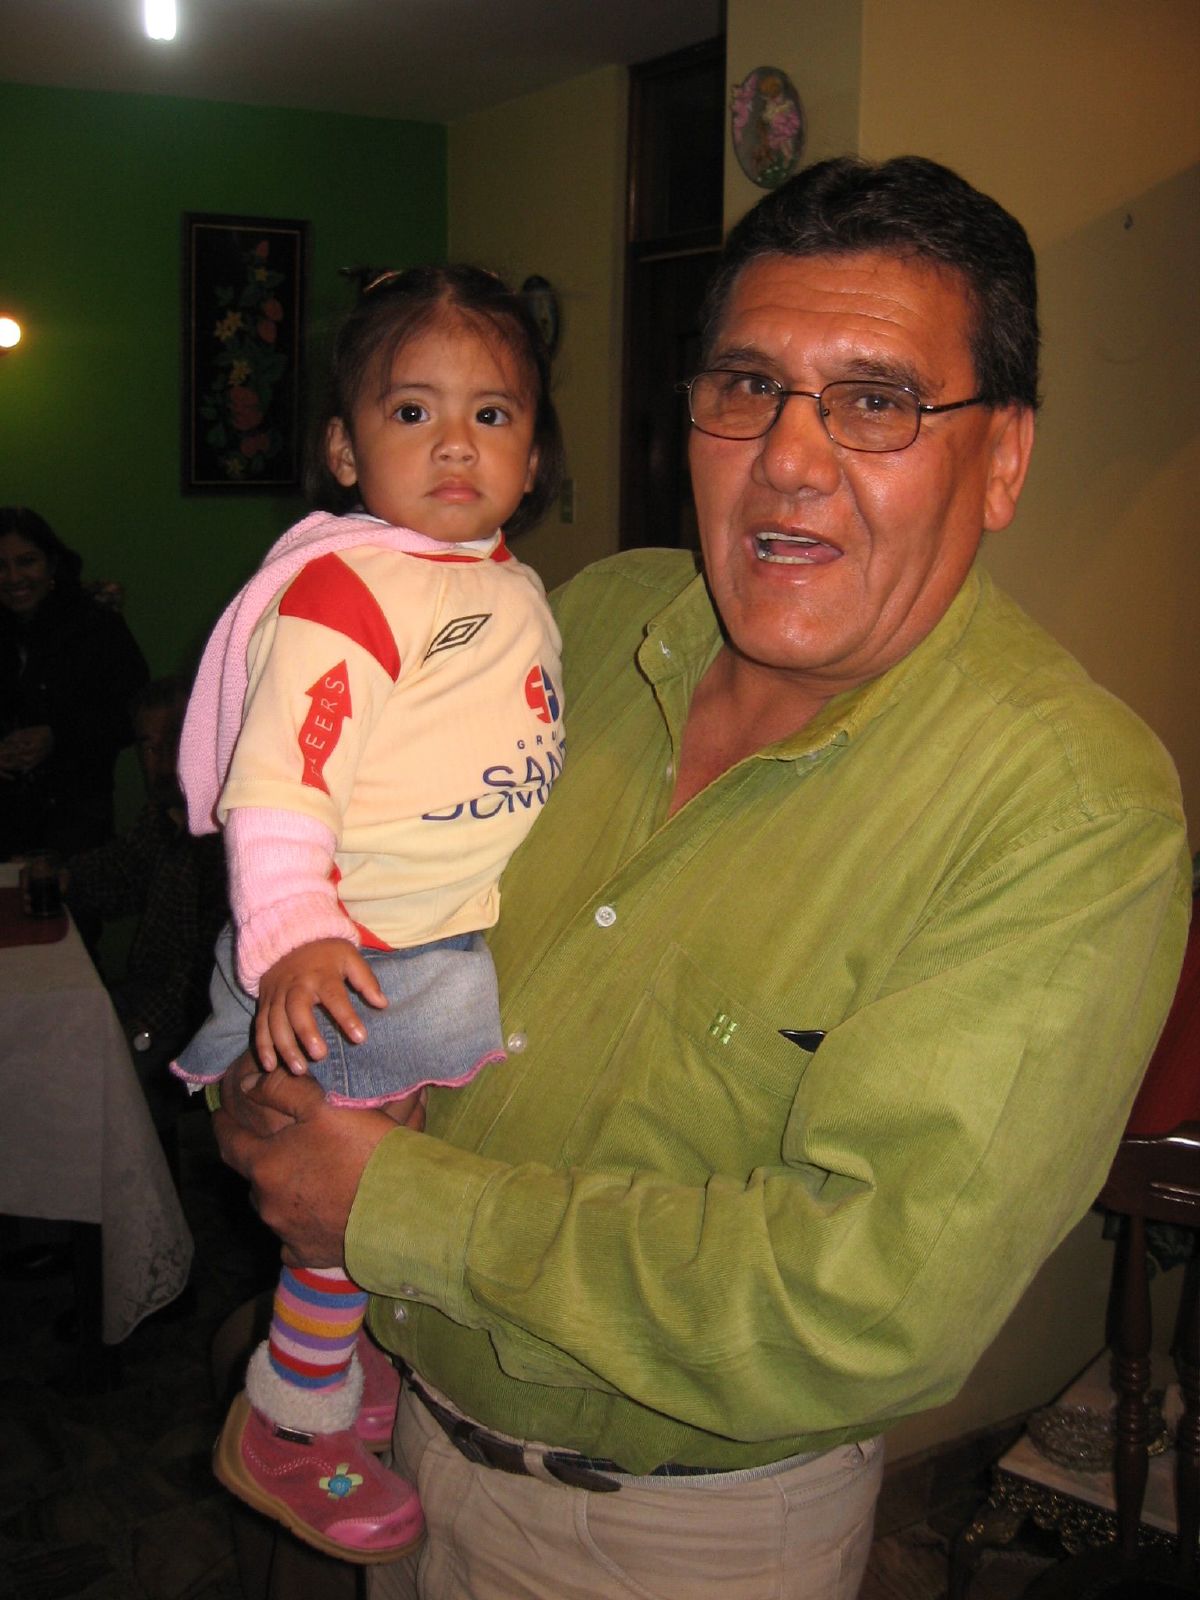 man holding a small child in his arms